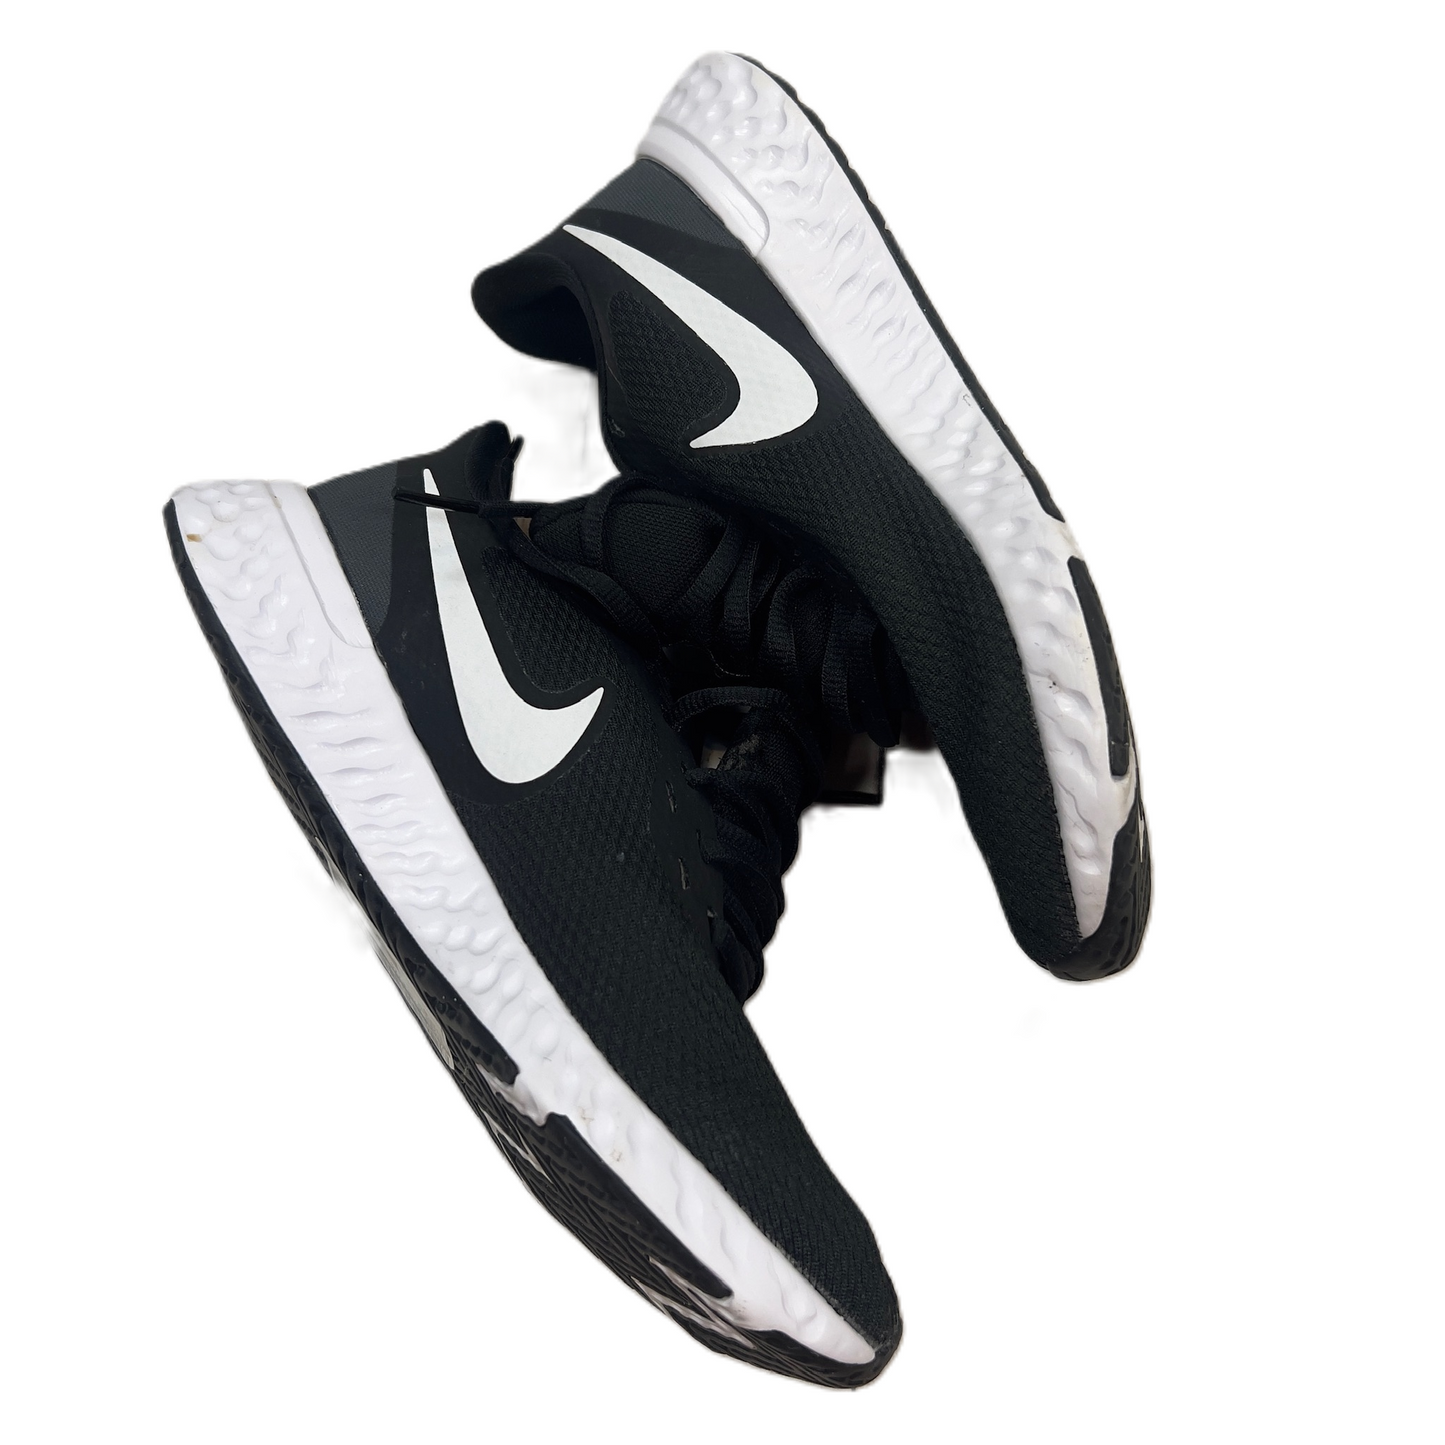 Black Shoes Athletic By Nike, Size: 6